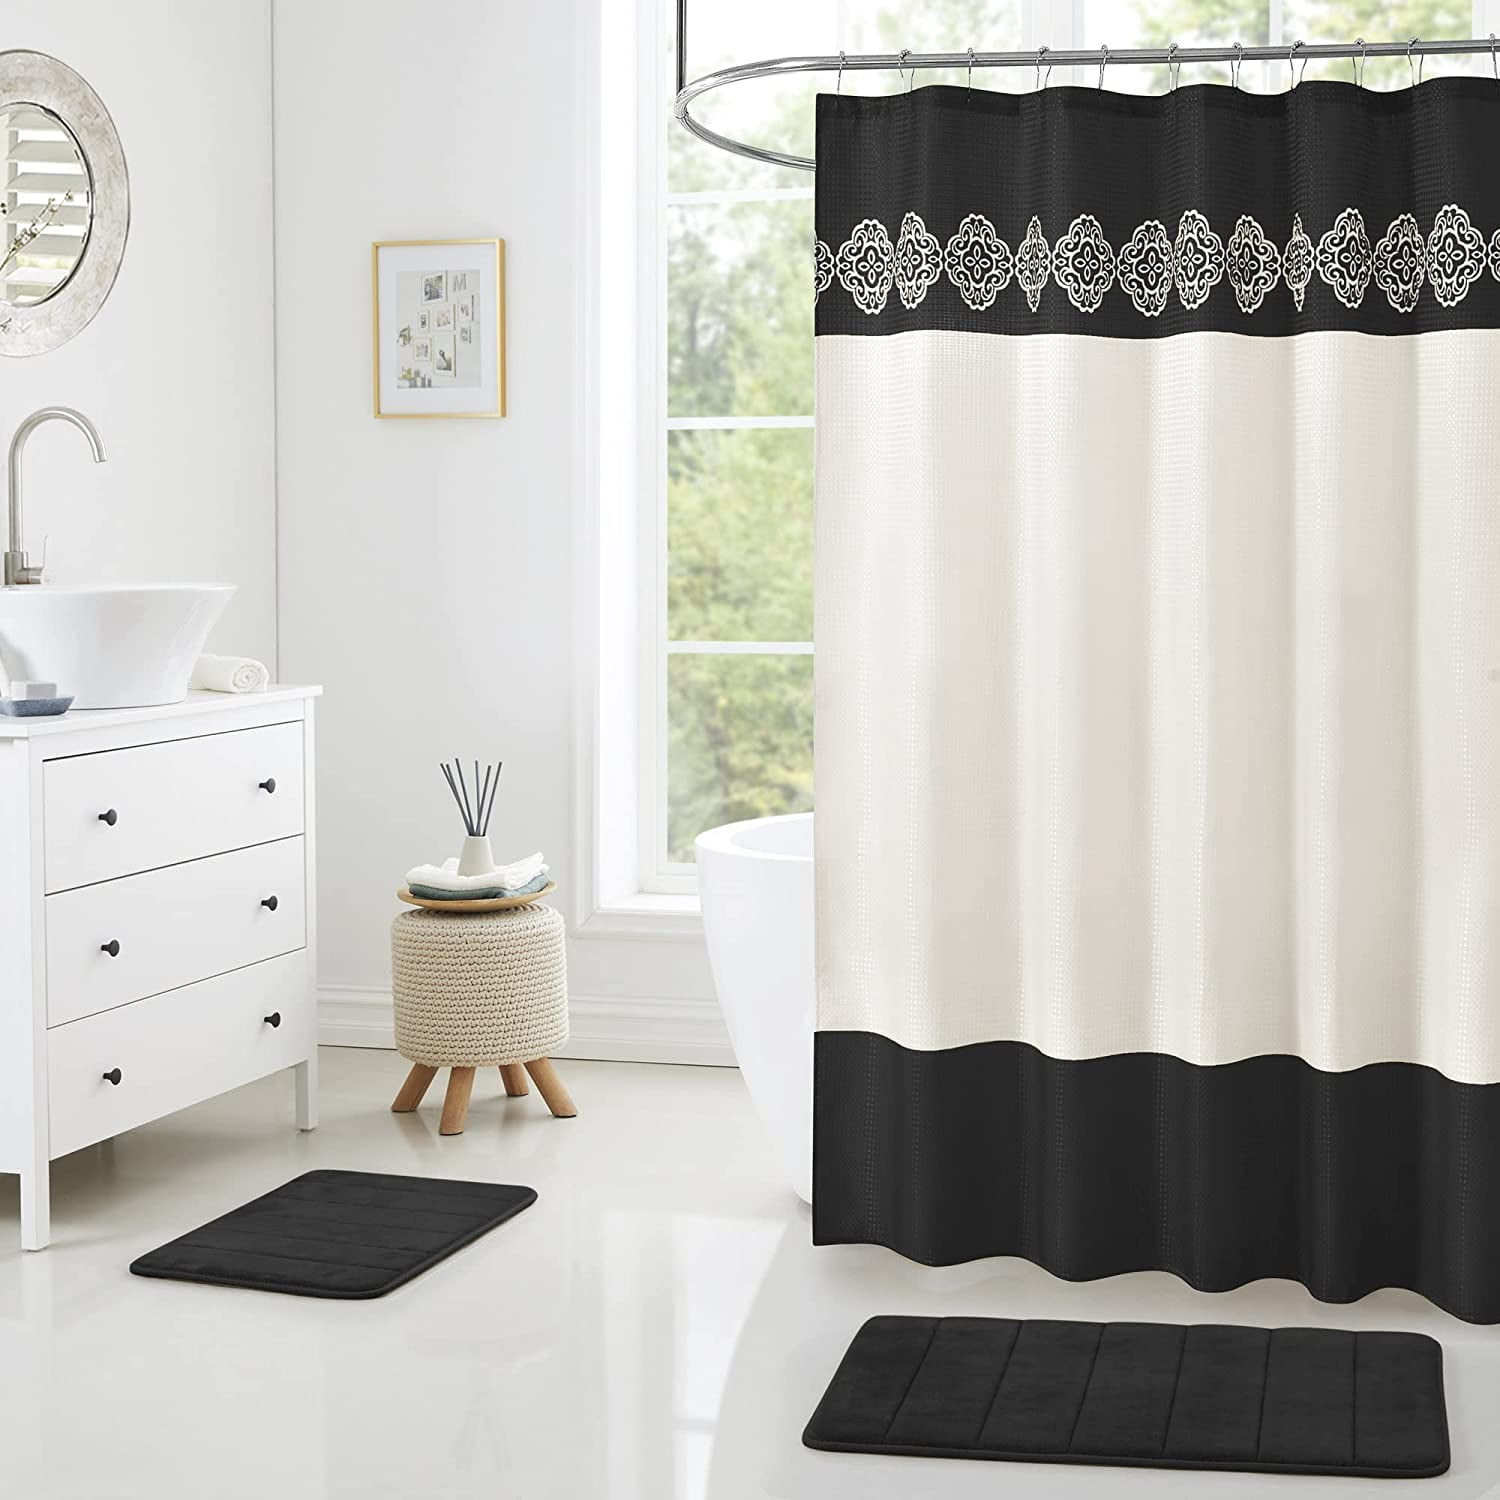  LAIZIHOME Grey Shower Curtain Modern Cool Girl Popular Bathroom  Accessories Machine Washable Polyester Fabric Shower Curtains Set with  Hooks 72x65 inch : Home & Kitchen